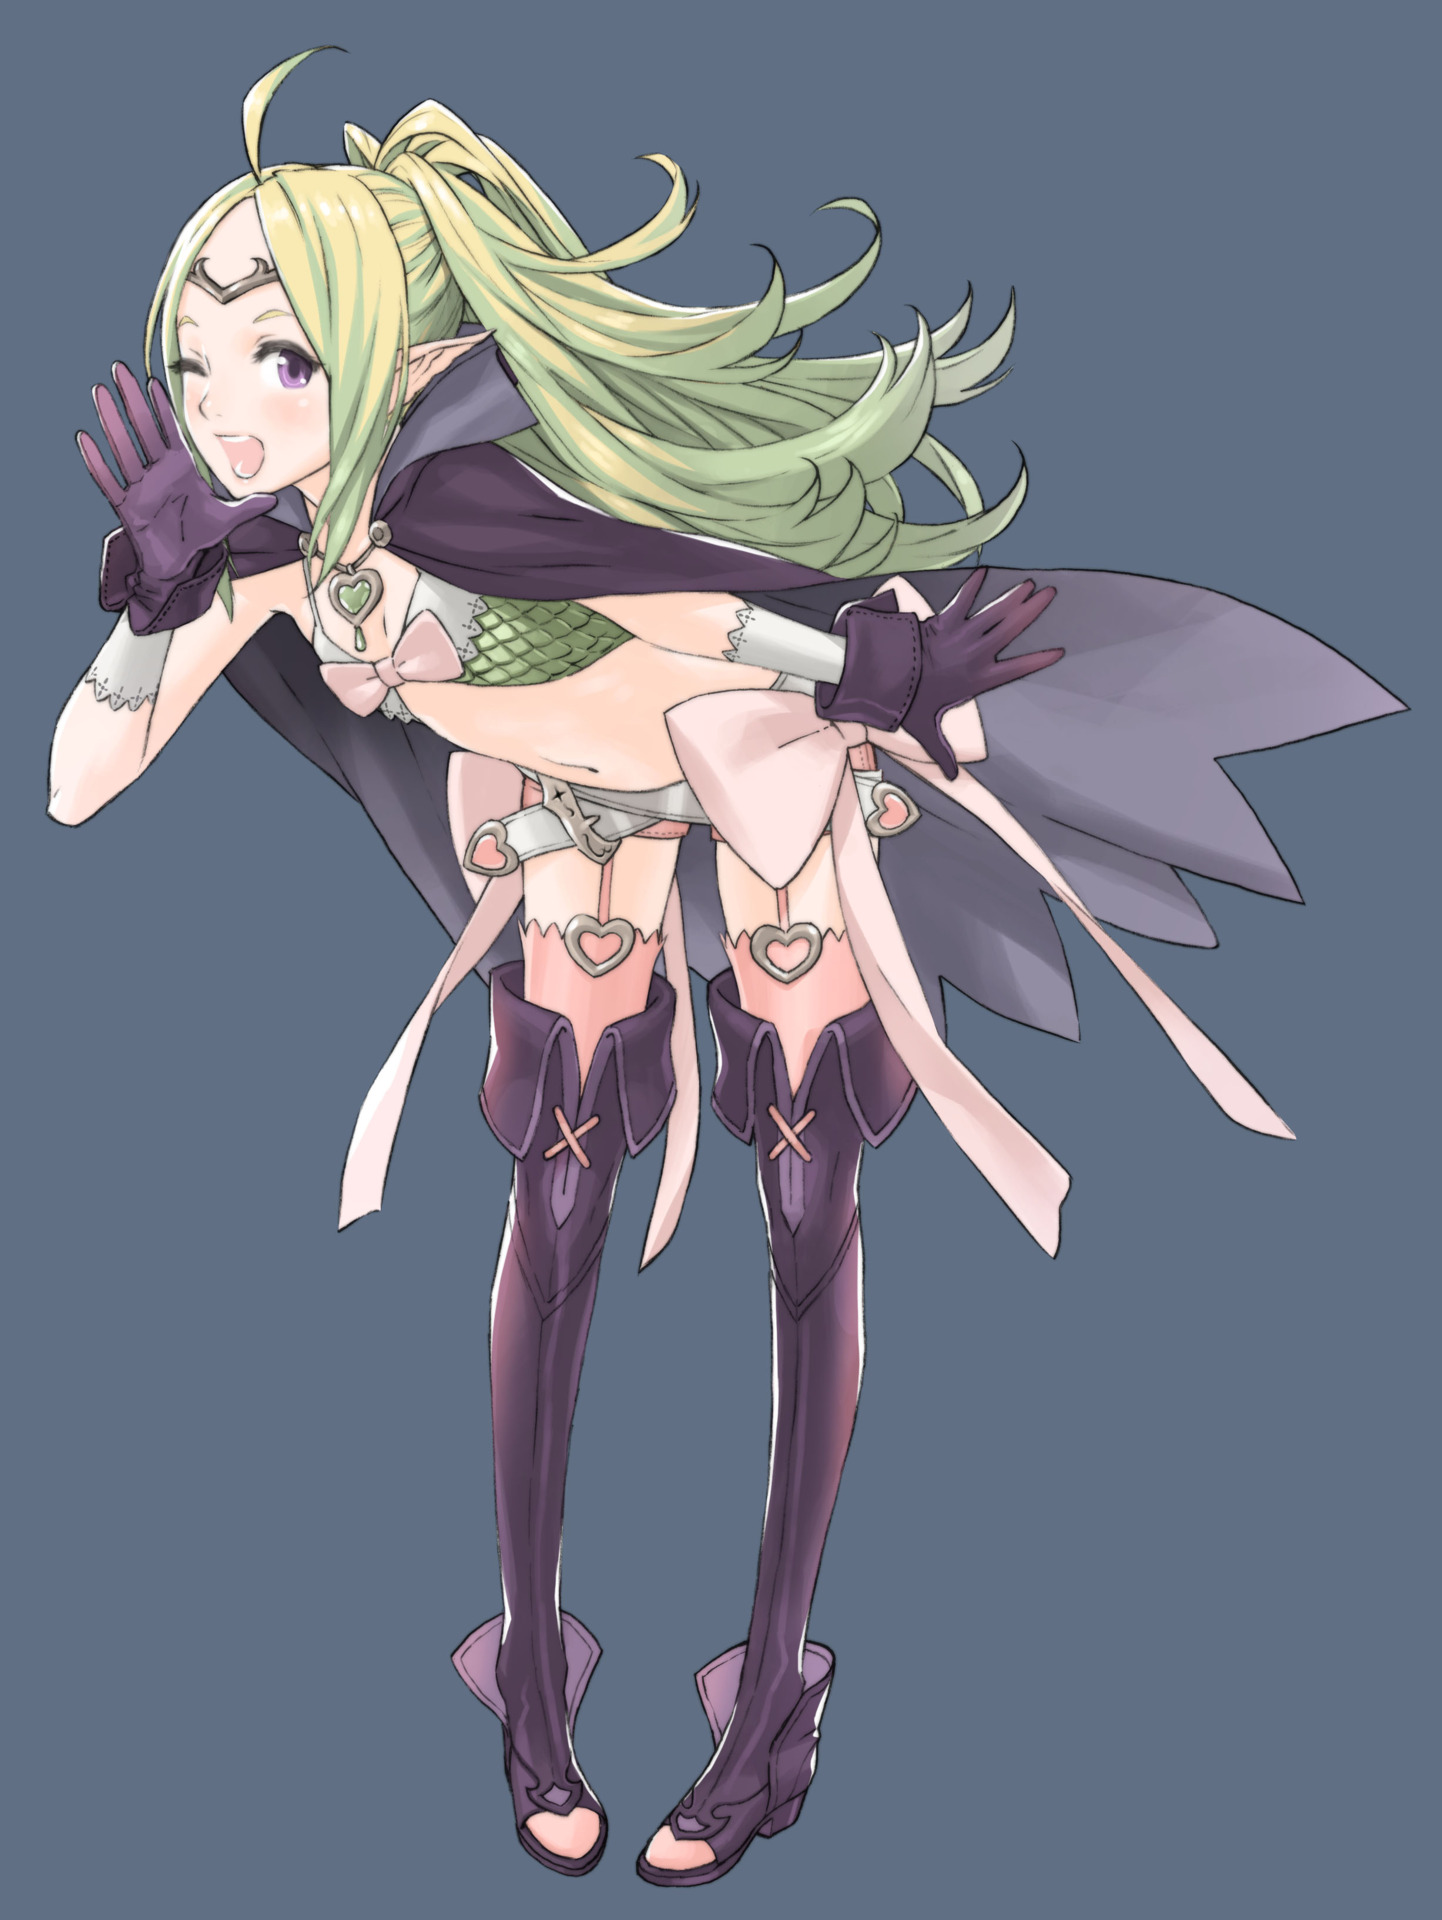 And Japan strikes again with fetishizing little girls. But it's okay! Nowi is over 1000 years old! *eyeroll* 